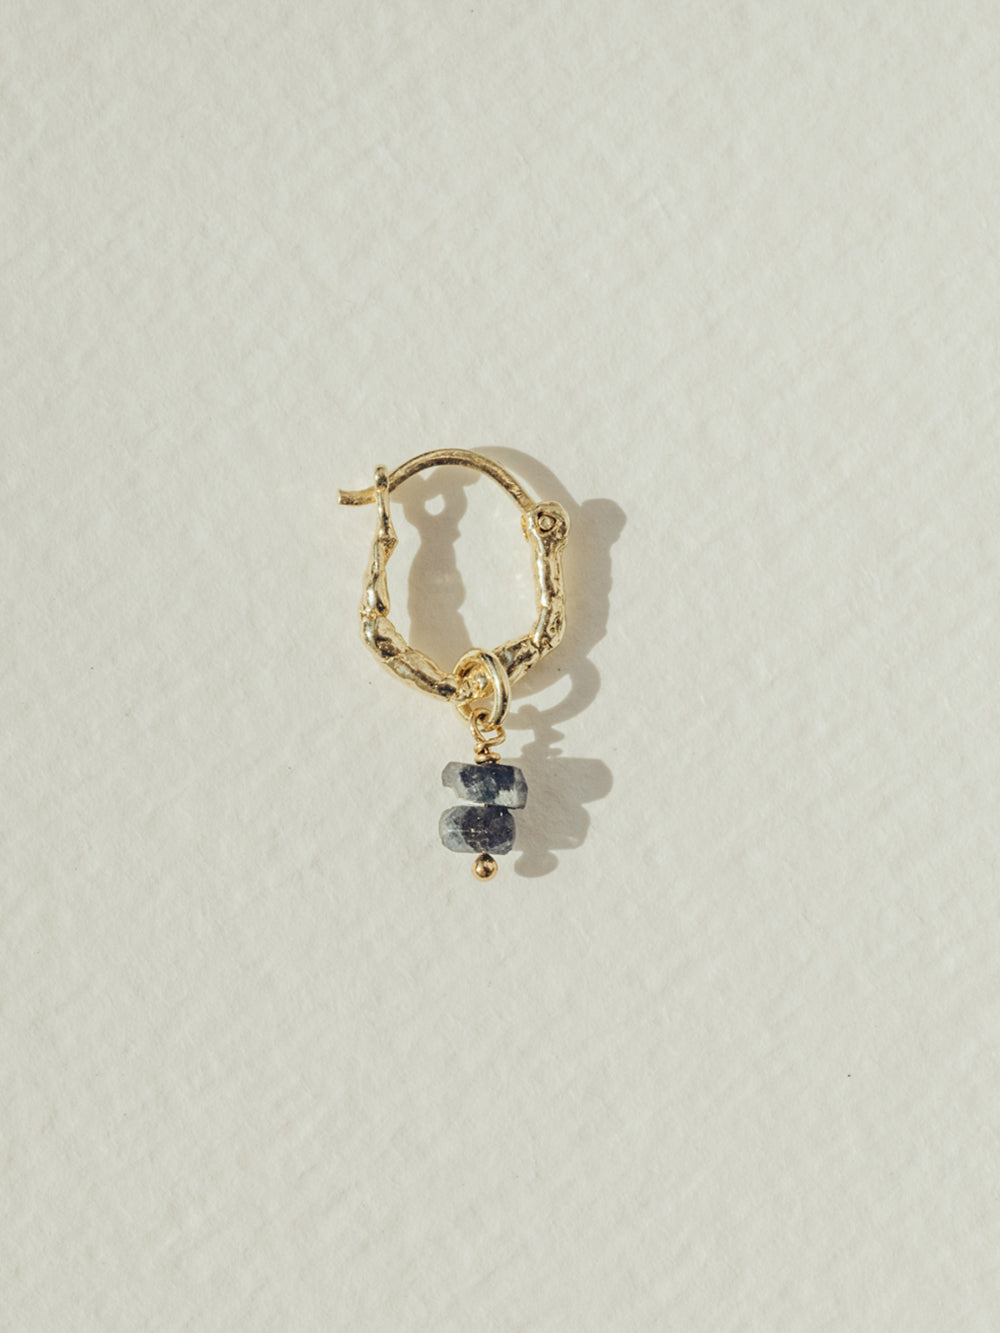 Sunny soldier - Sapphire | 14K Gold Plated